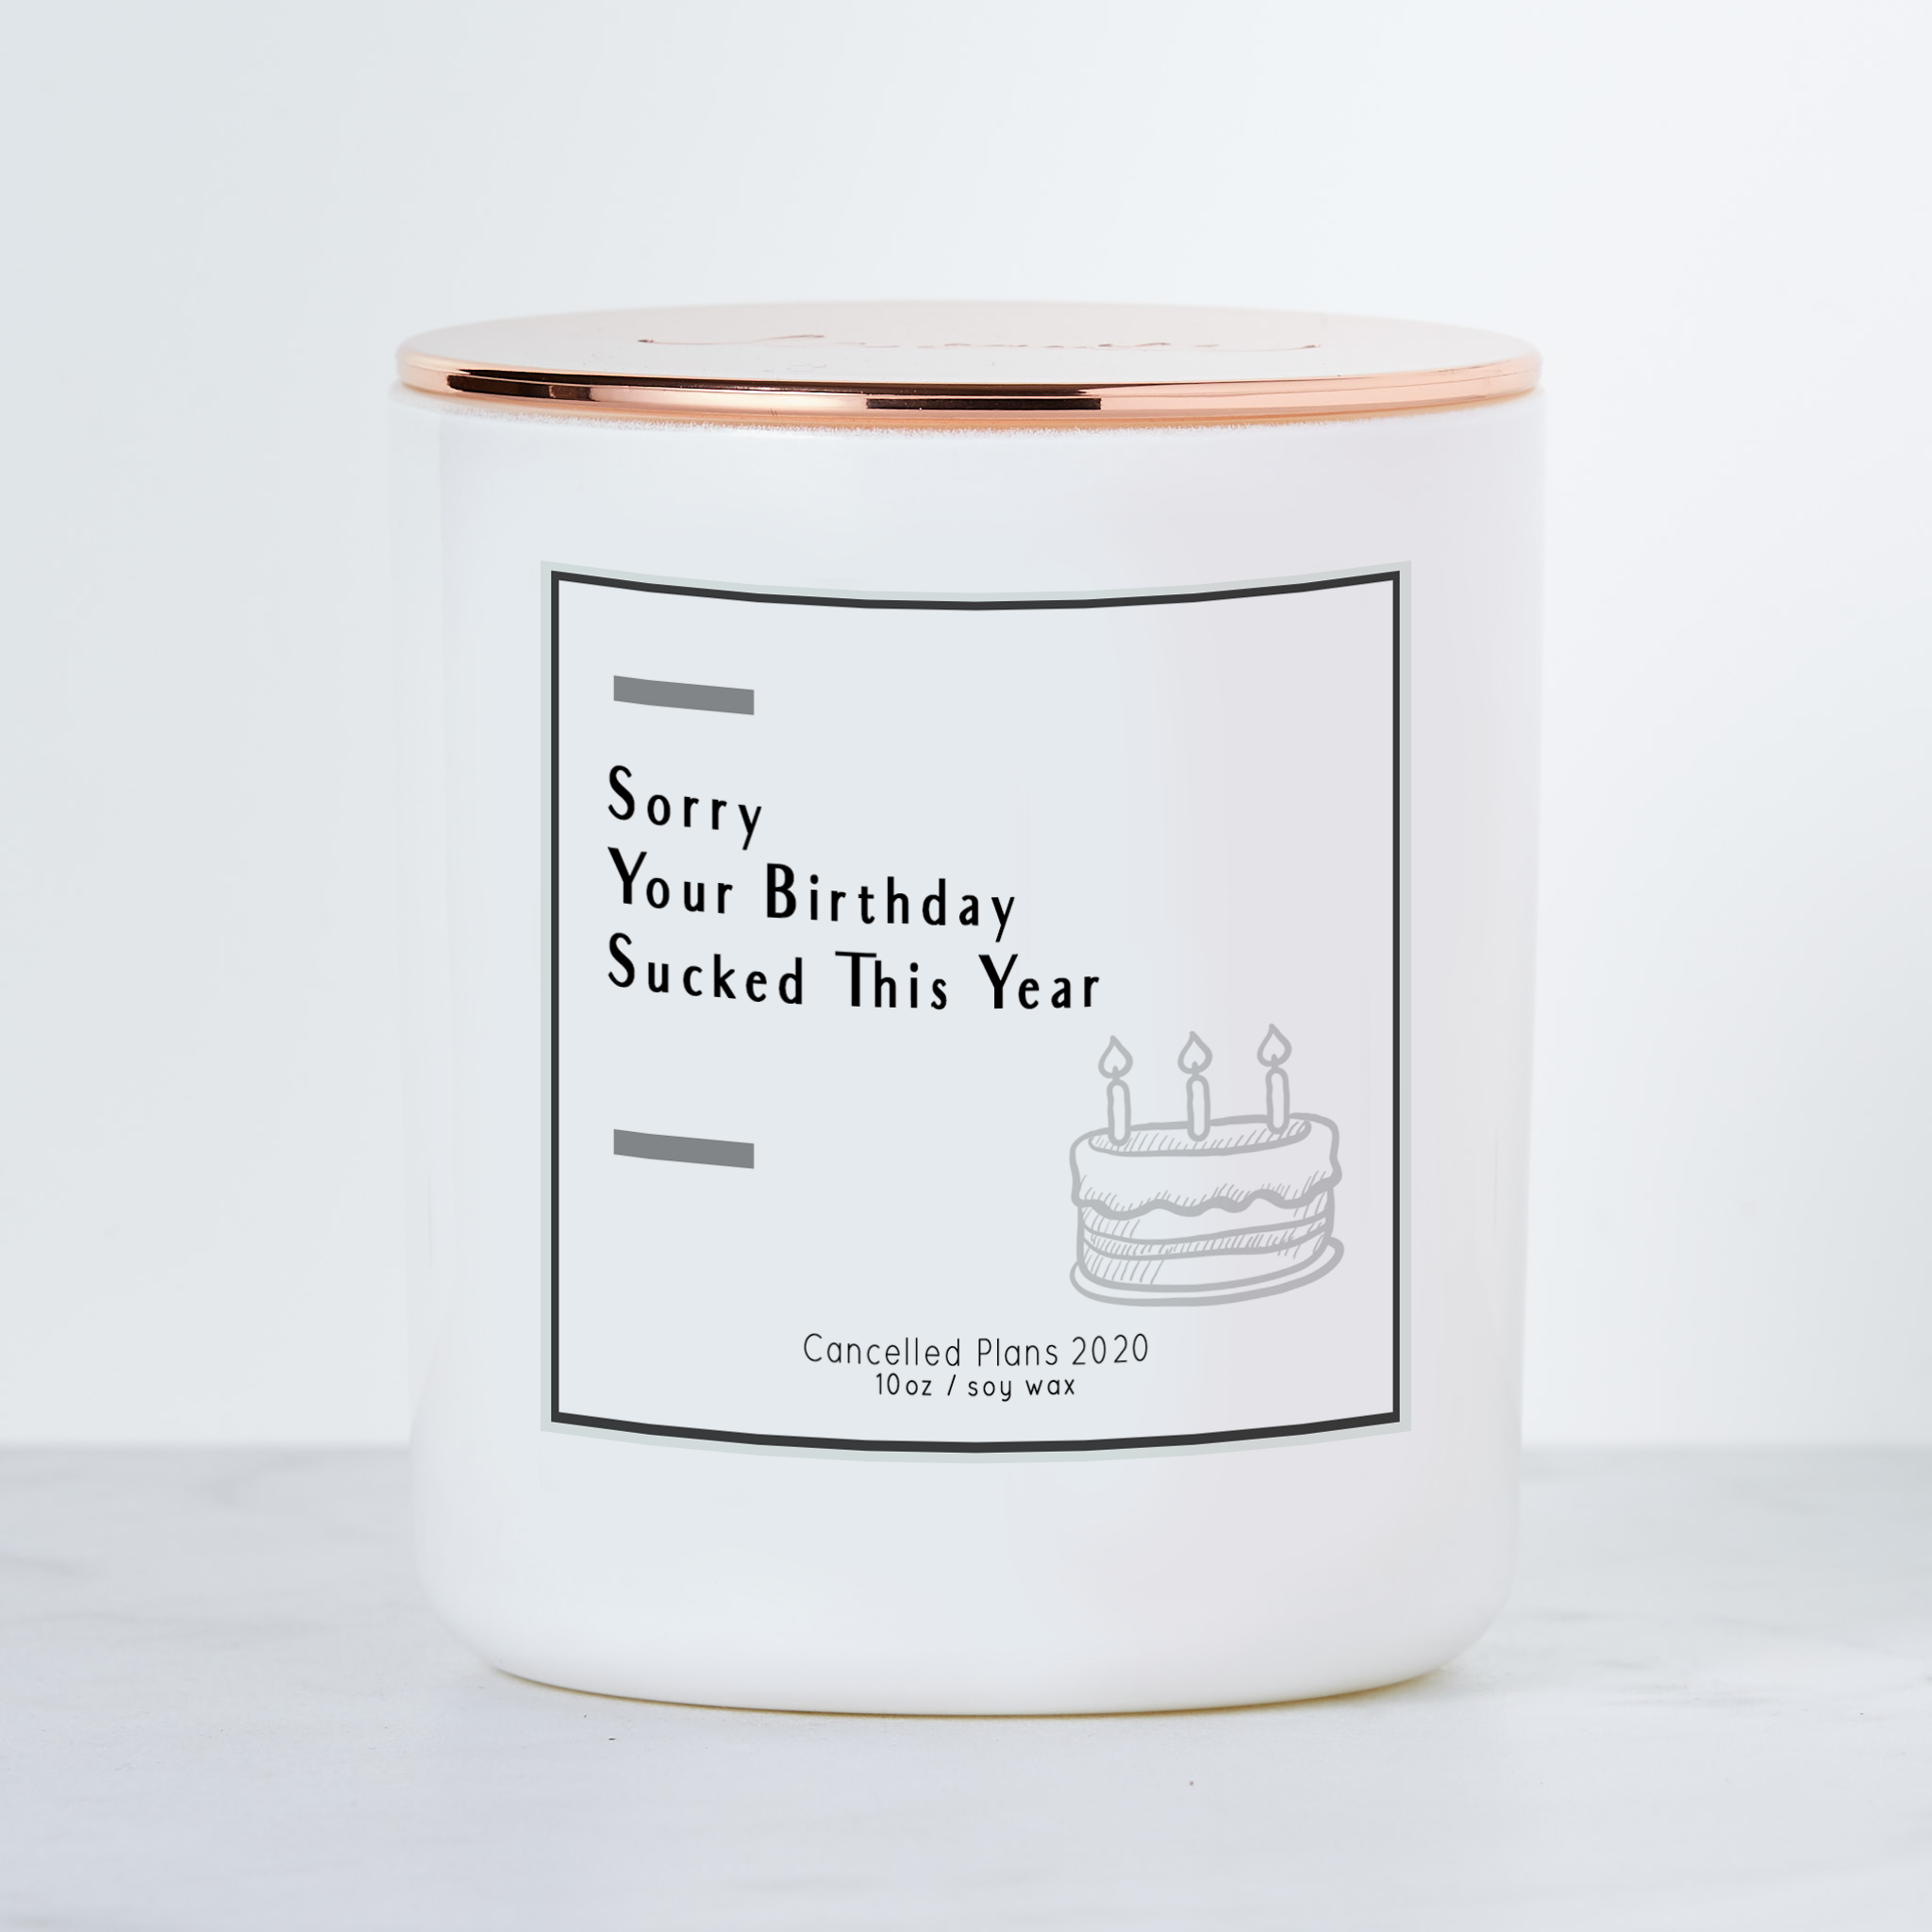 Sorry Your Birthday Sucked This Year Luxe Scented Soy Candle